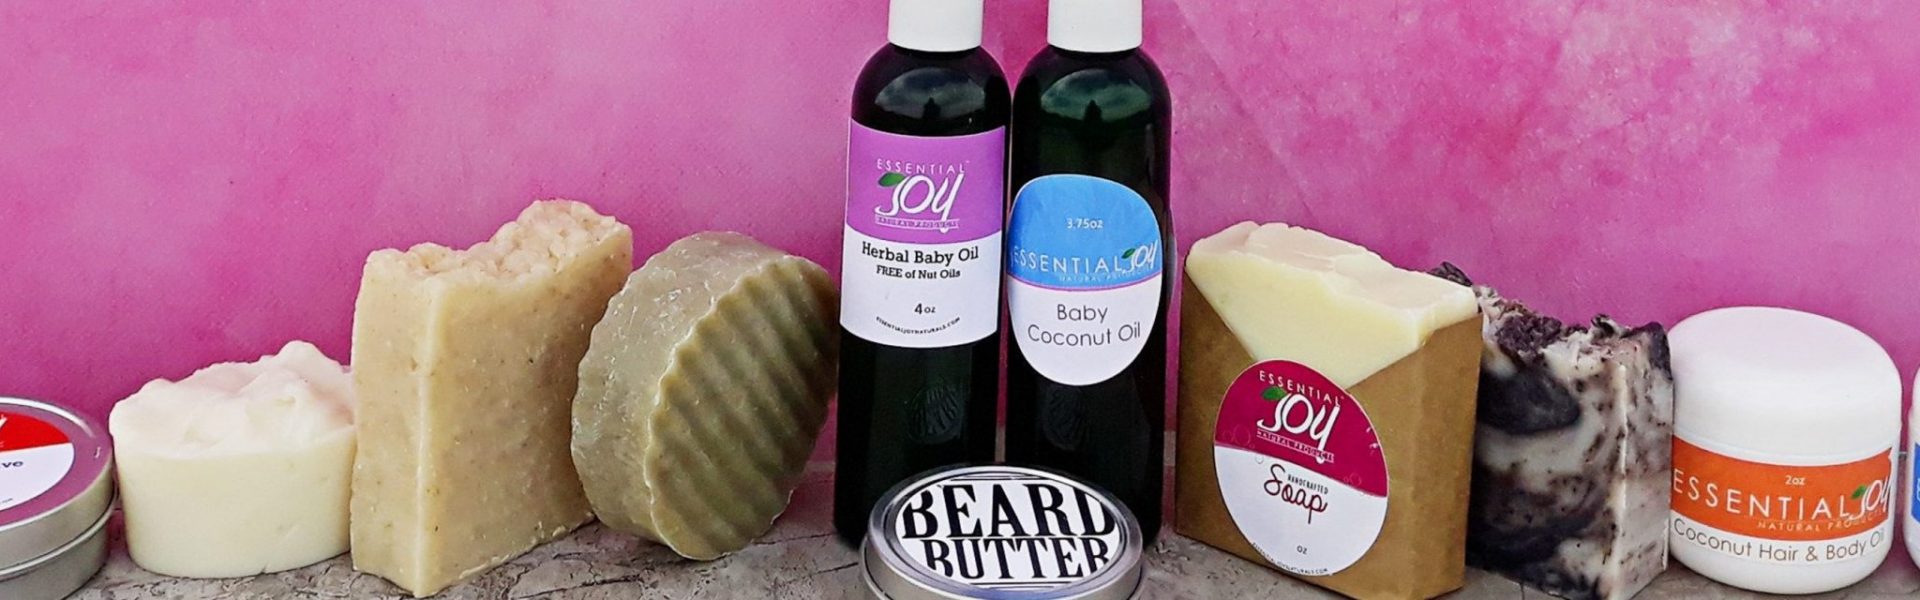 Essential Joy Natural Products